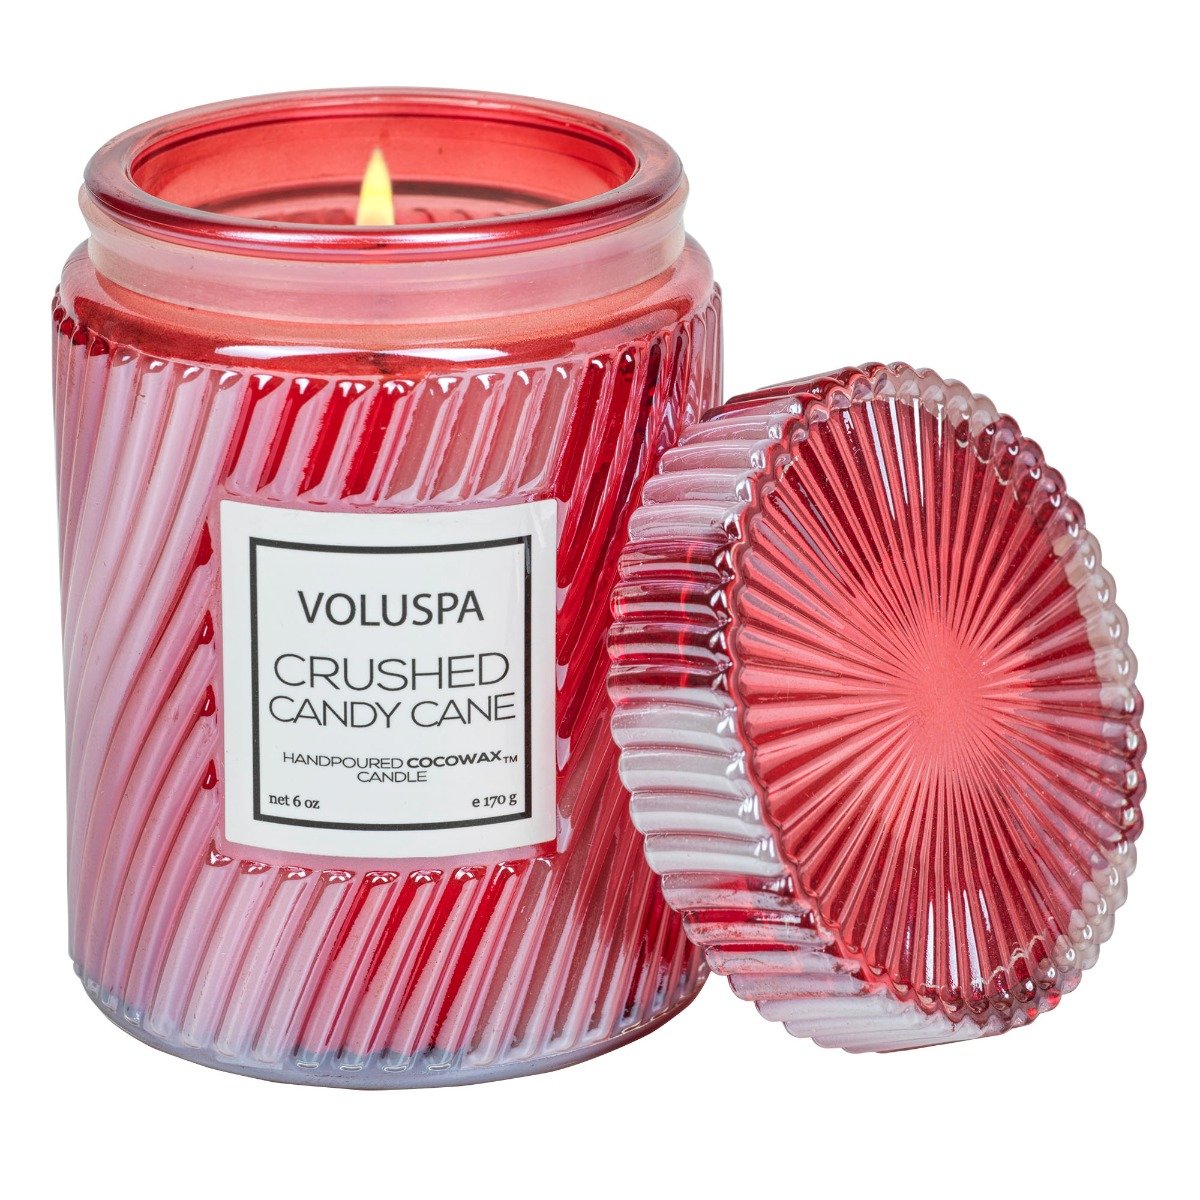 Crushed Candy Cane Embossed Small Glass Candle